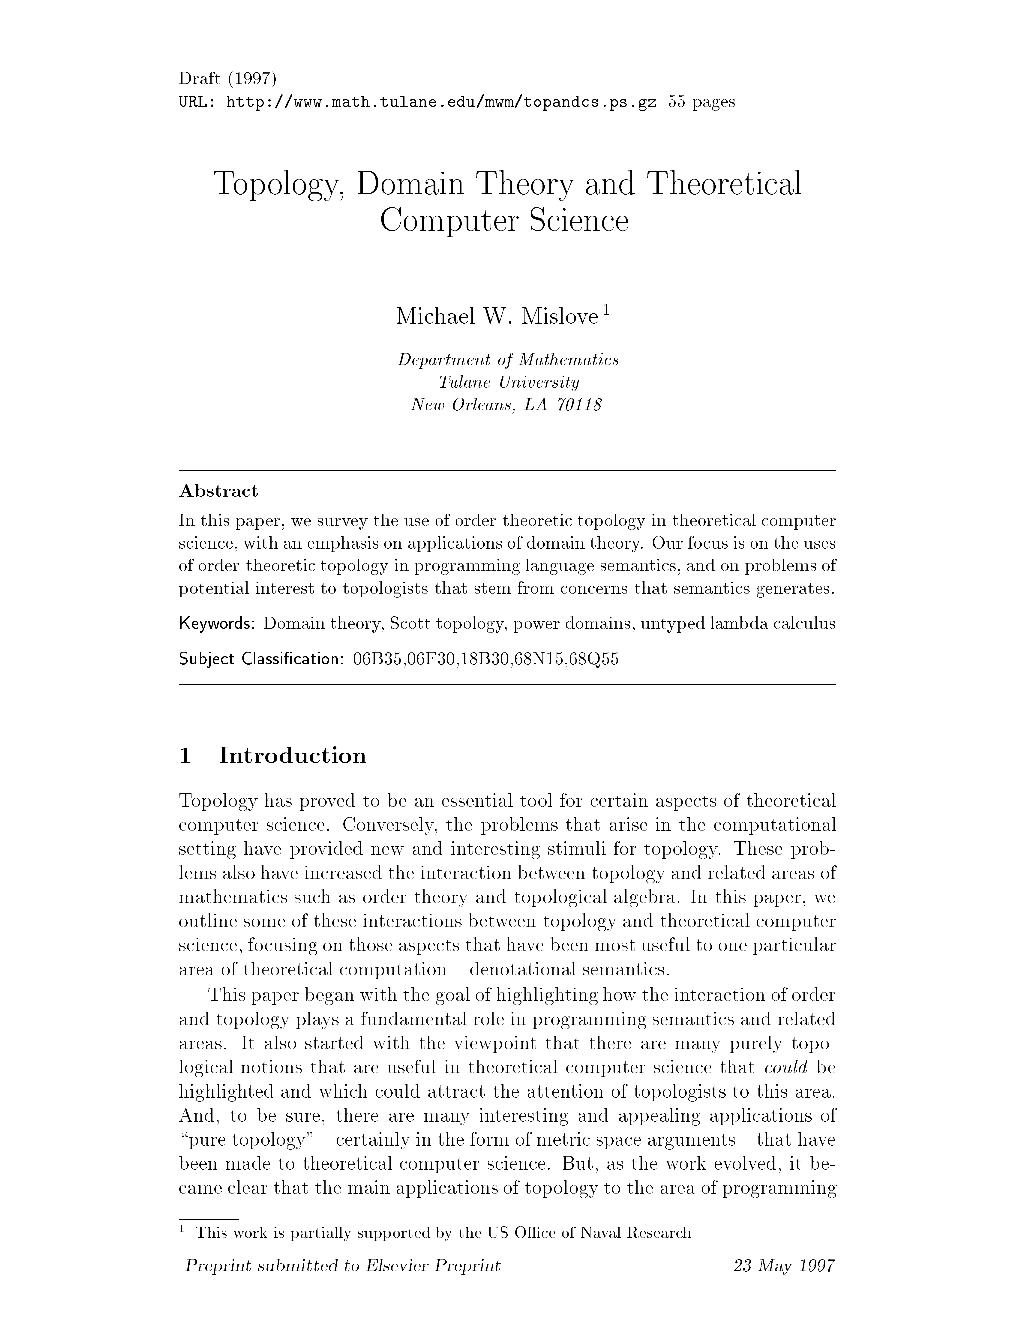 Topology, Domain Theory and Theoretical Computer Science